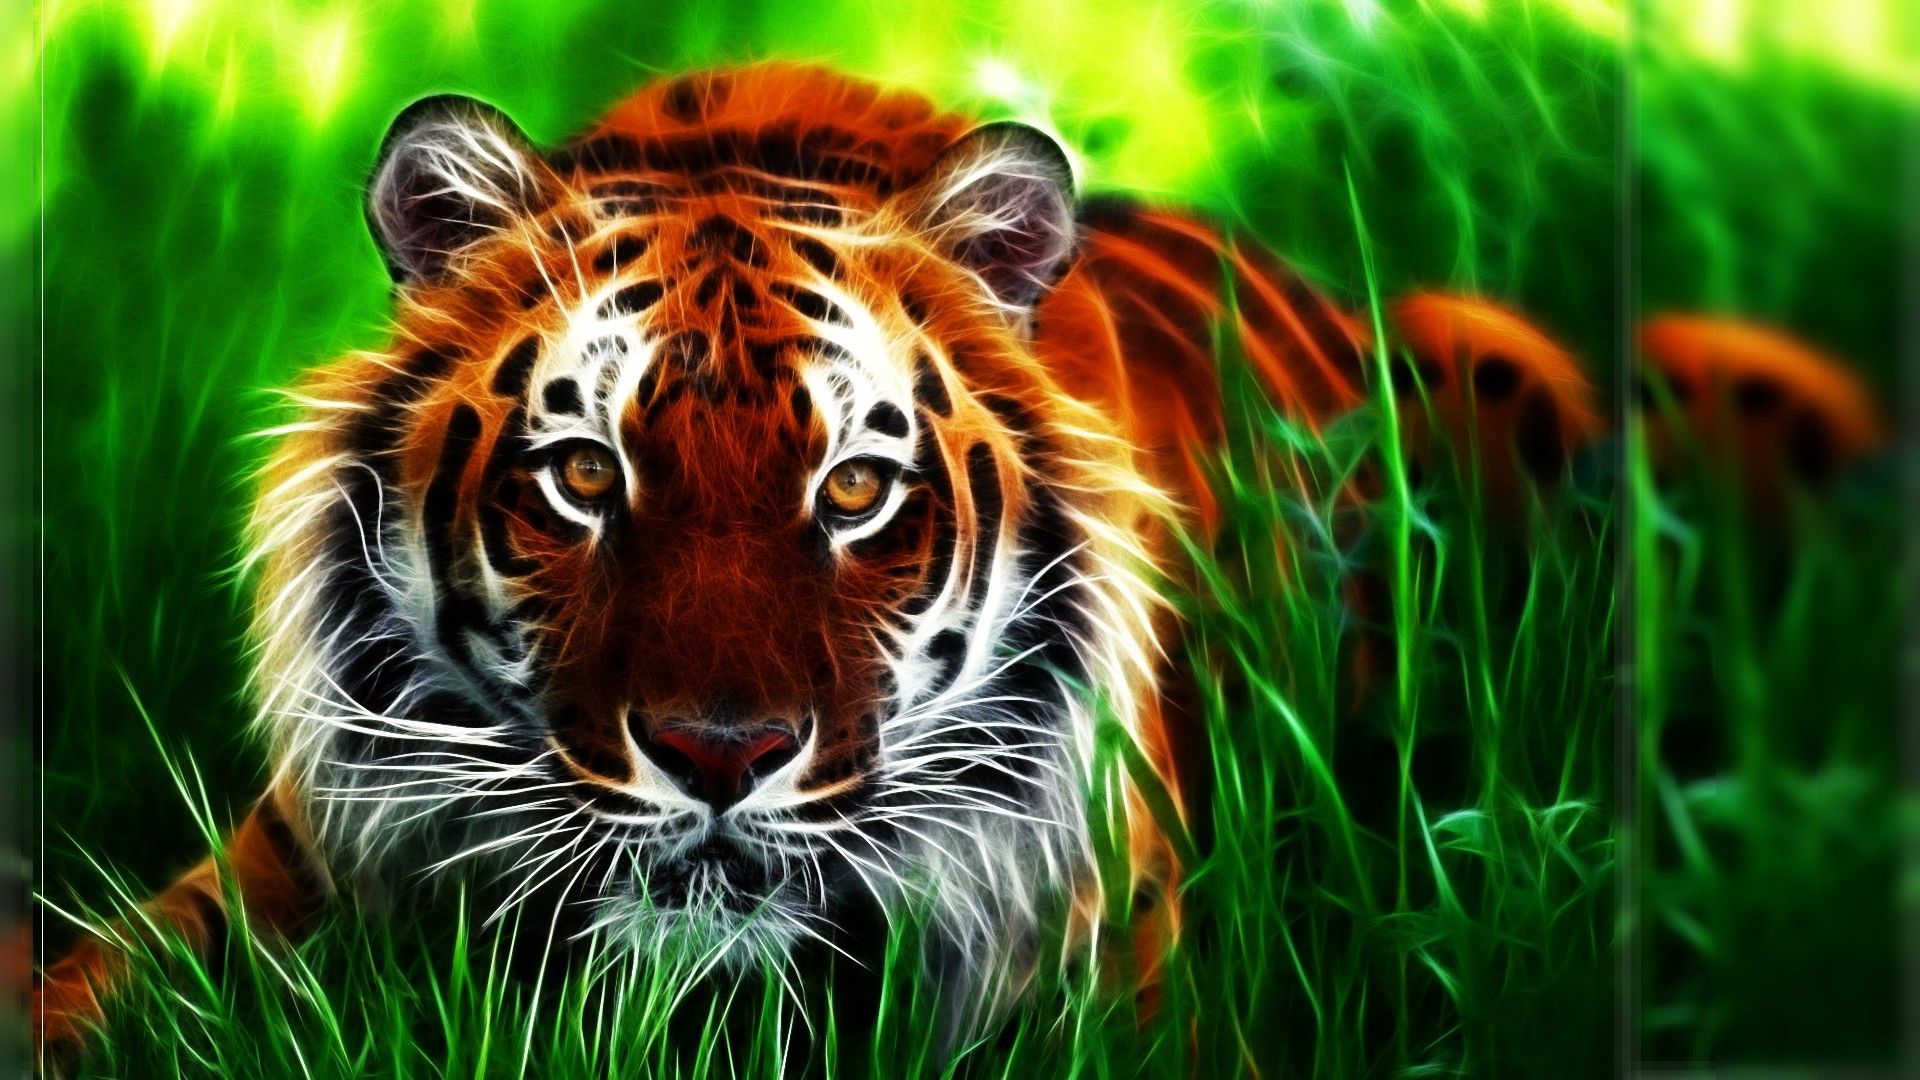 Buy Avikalp Exclusive Awi1918 Tiger Full HD 3D Wallpaper 4 x 3 Feet  Online at Low Prices in India  Amazonin